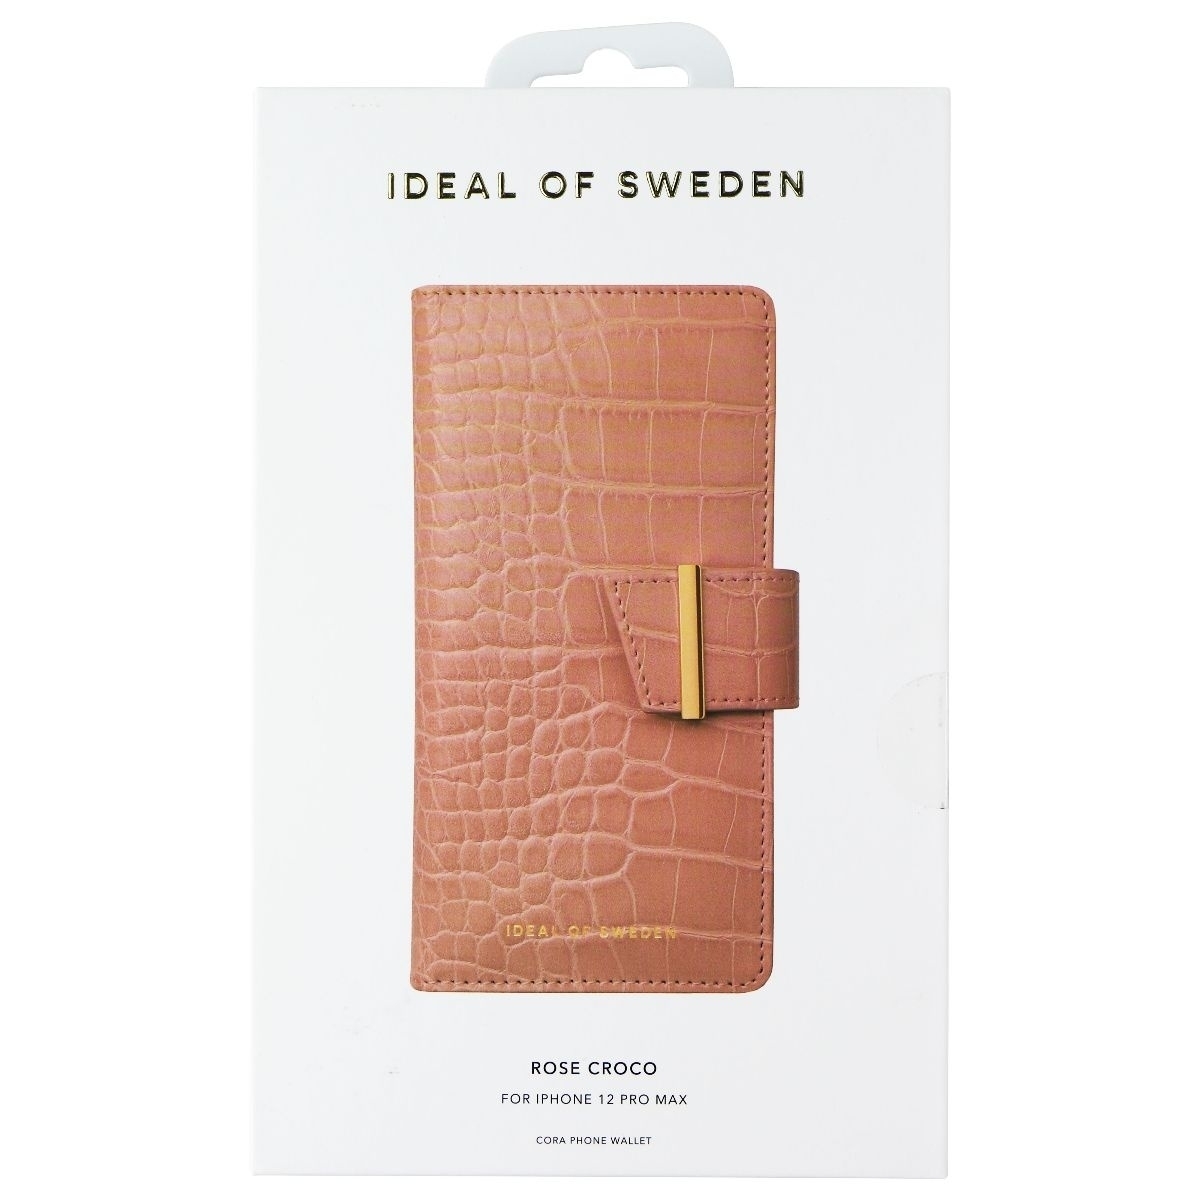 IDeal Of Sweden Cora Phone Wallet For IPhone 12 Pro Max - Rose Croco